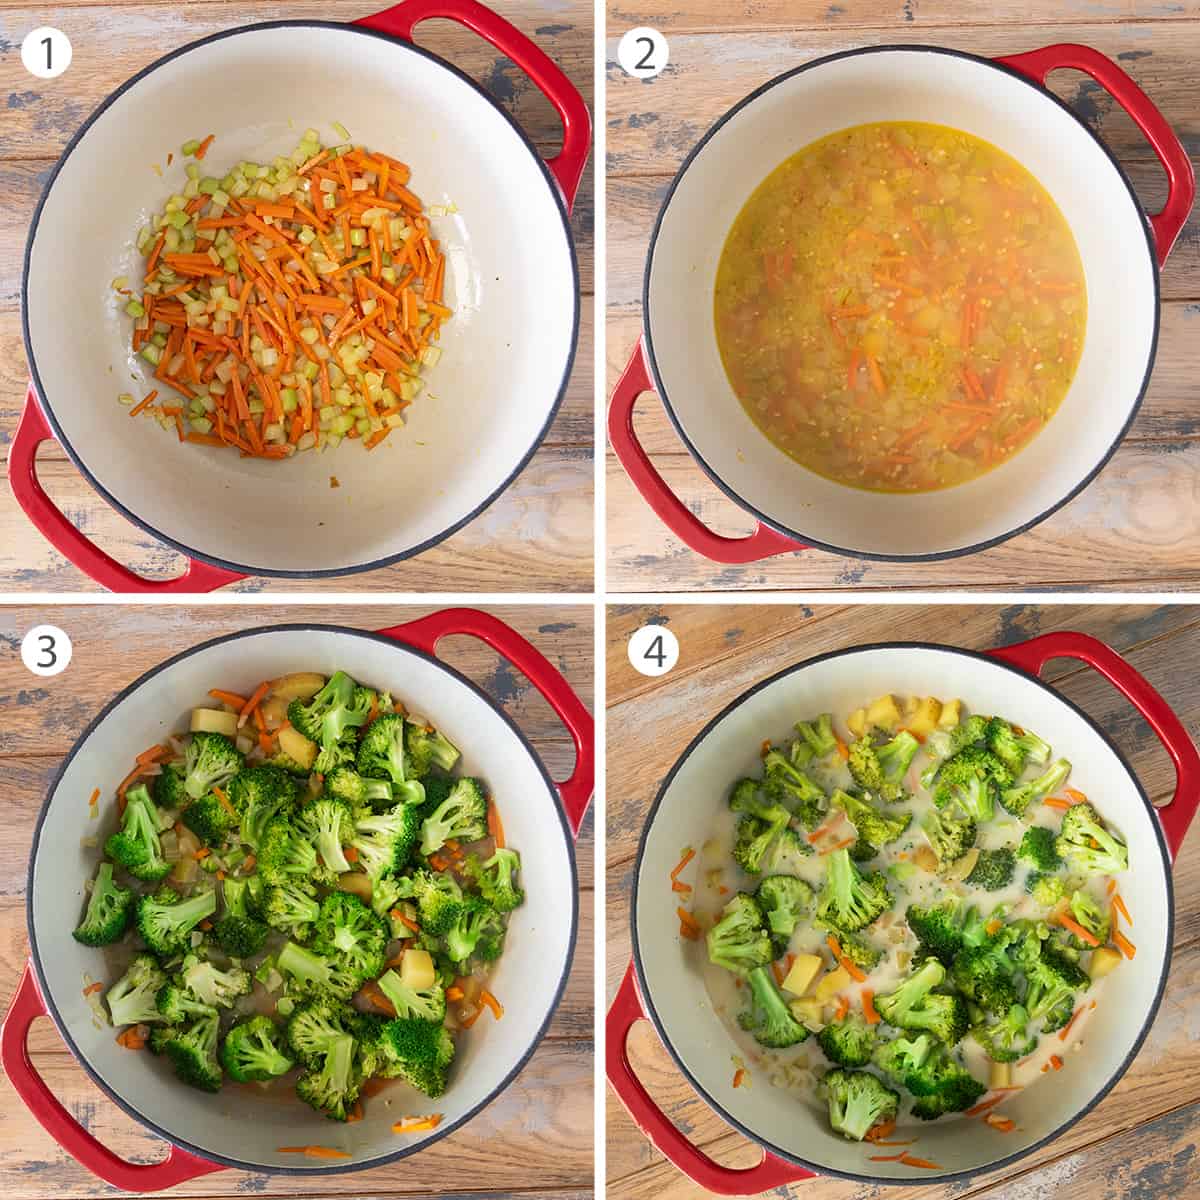 Steps to making broccoli cheese soup.